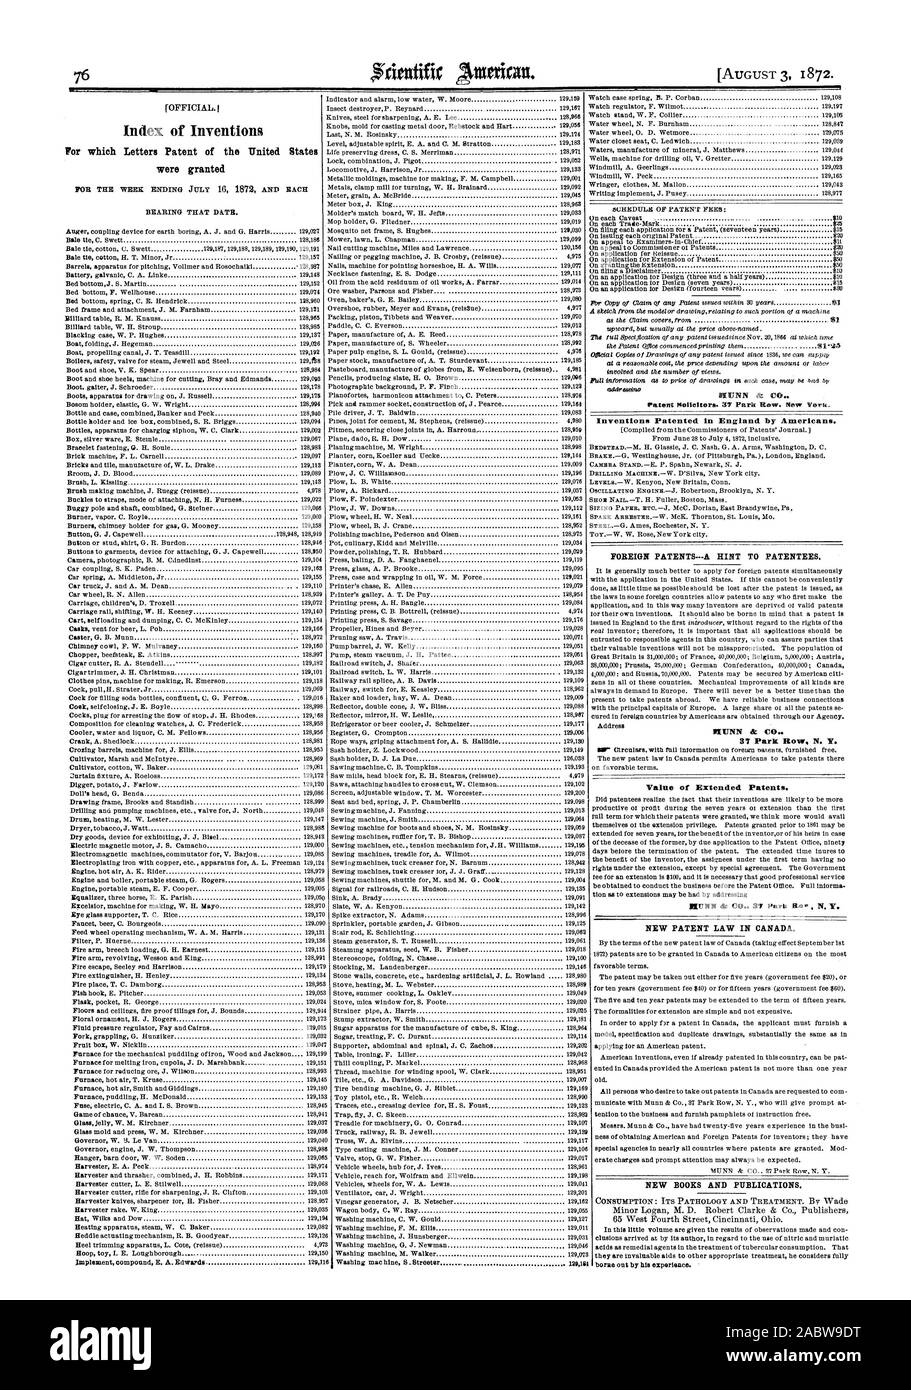 AUGUST 3 1872. NUNN & C Inventions Patented in England by Americans. FOREIGN PATENTSA HINT TO PATENTEES. IIITNN dc C Value of Extended Patents. NEW PATENT LAW IN CANADA. NEW BOOKS AND PUBLICATIONS. borne out by hie experience. Index of Inventions For which Letters Patent of the United States were granted, scientific american, 1872-08-03 Stock Photo